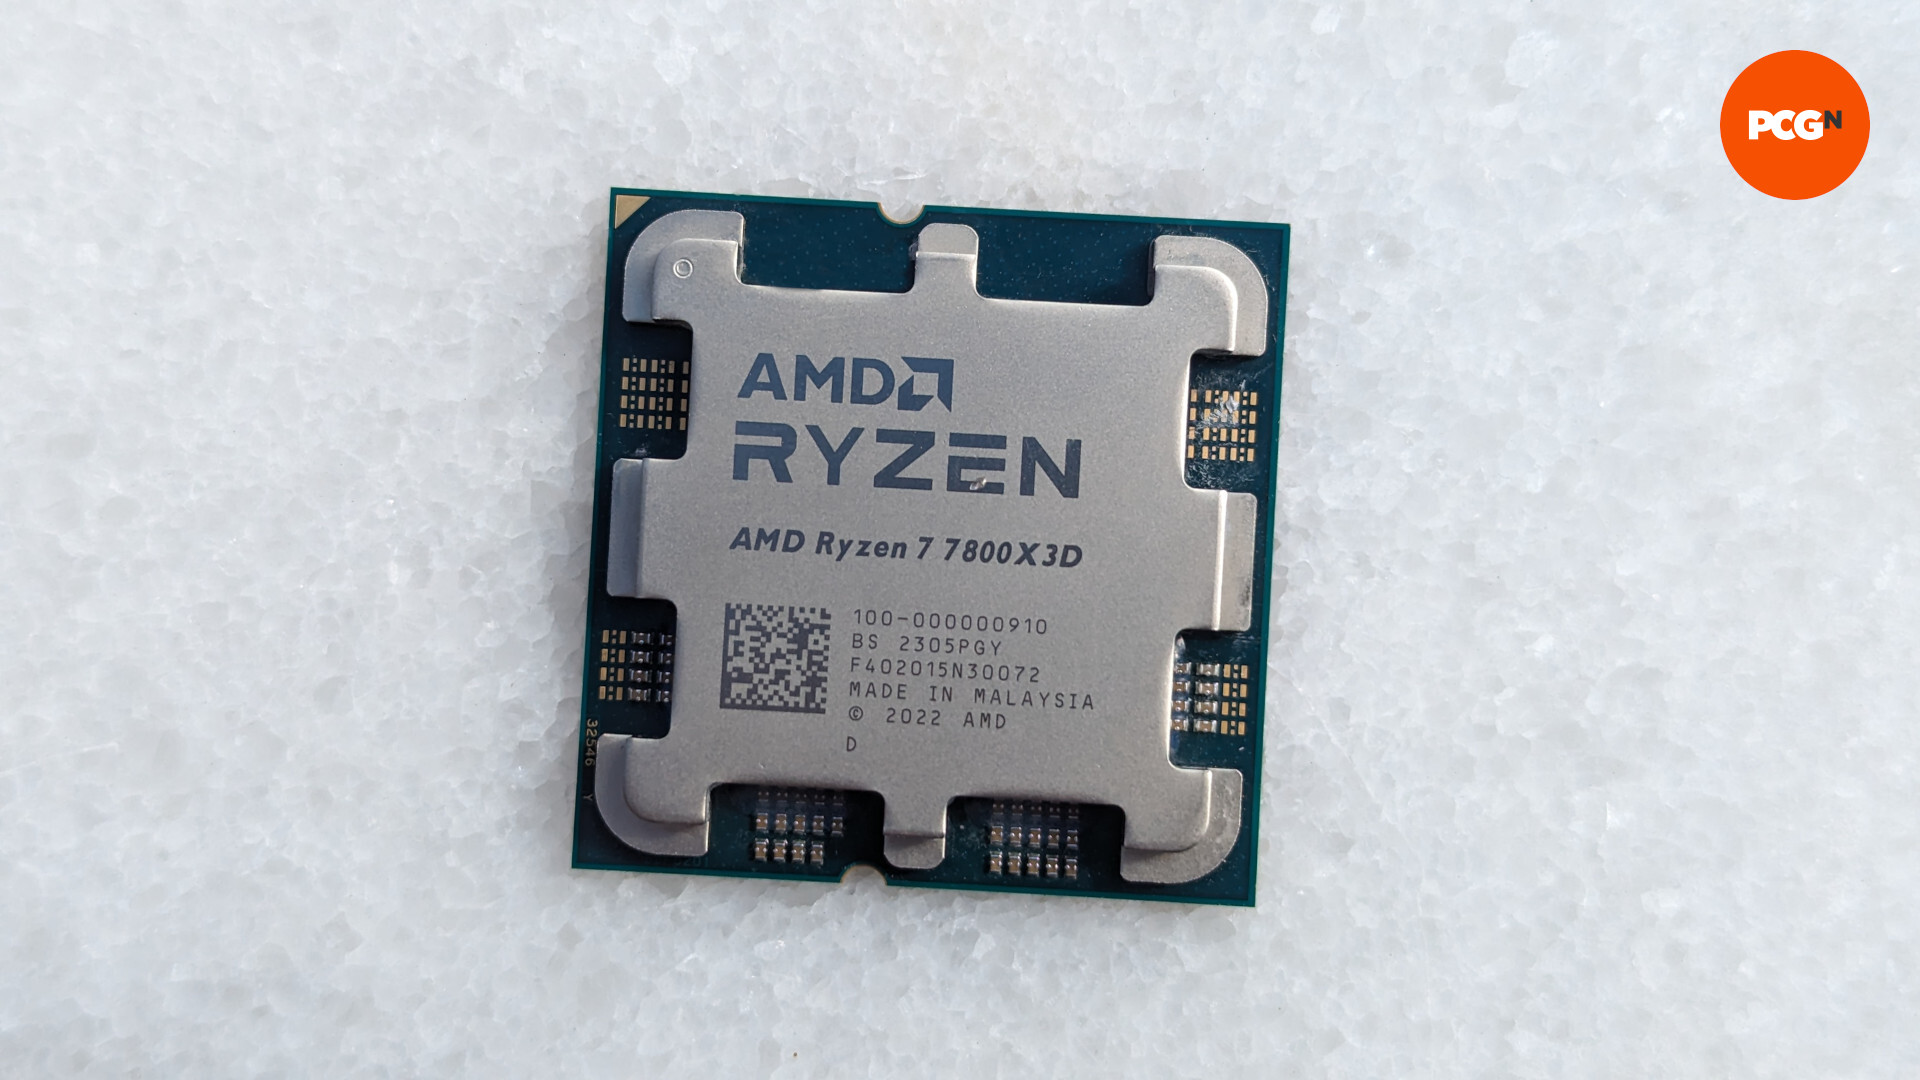 AMD Ryzen 7 7800X3D review: CPU rests on a white surface